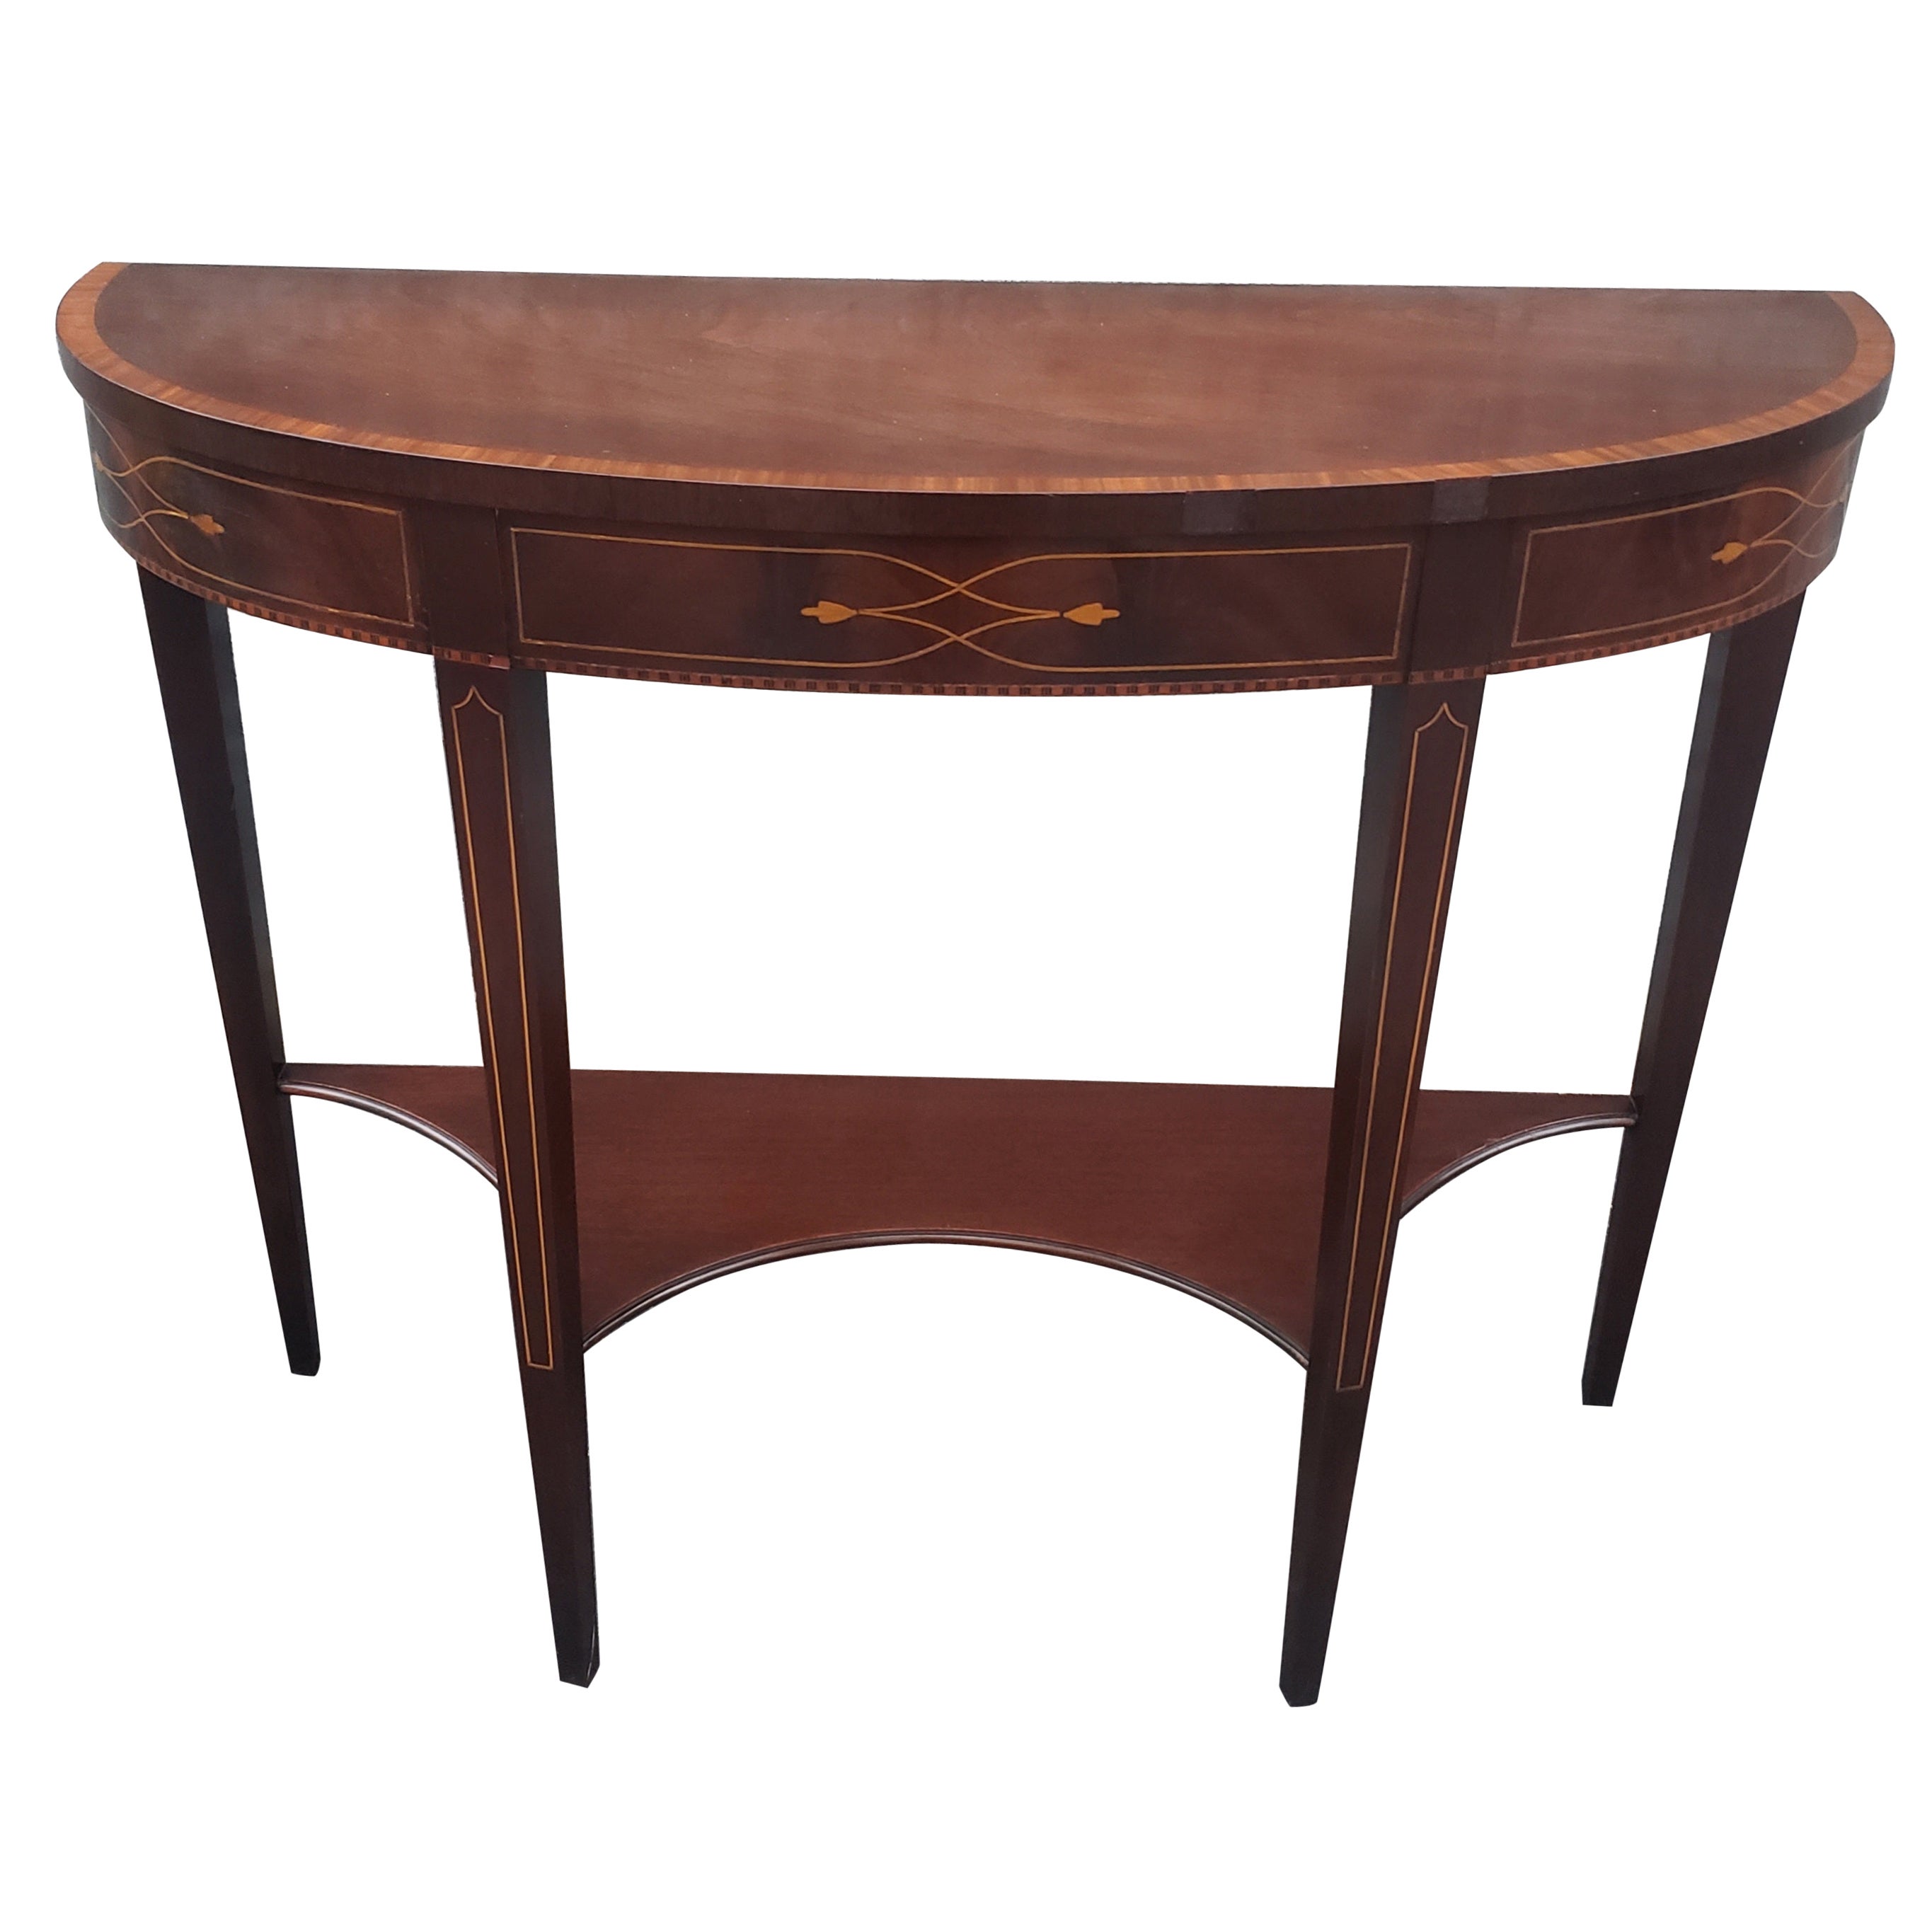 1930s Federal Two-Tier Mahogany and Satinwood Inlaid Demilune Console Table